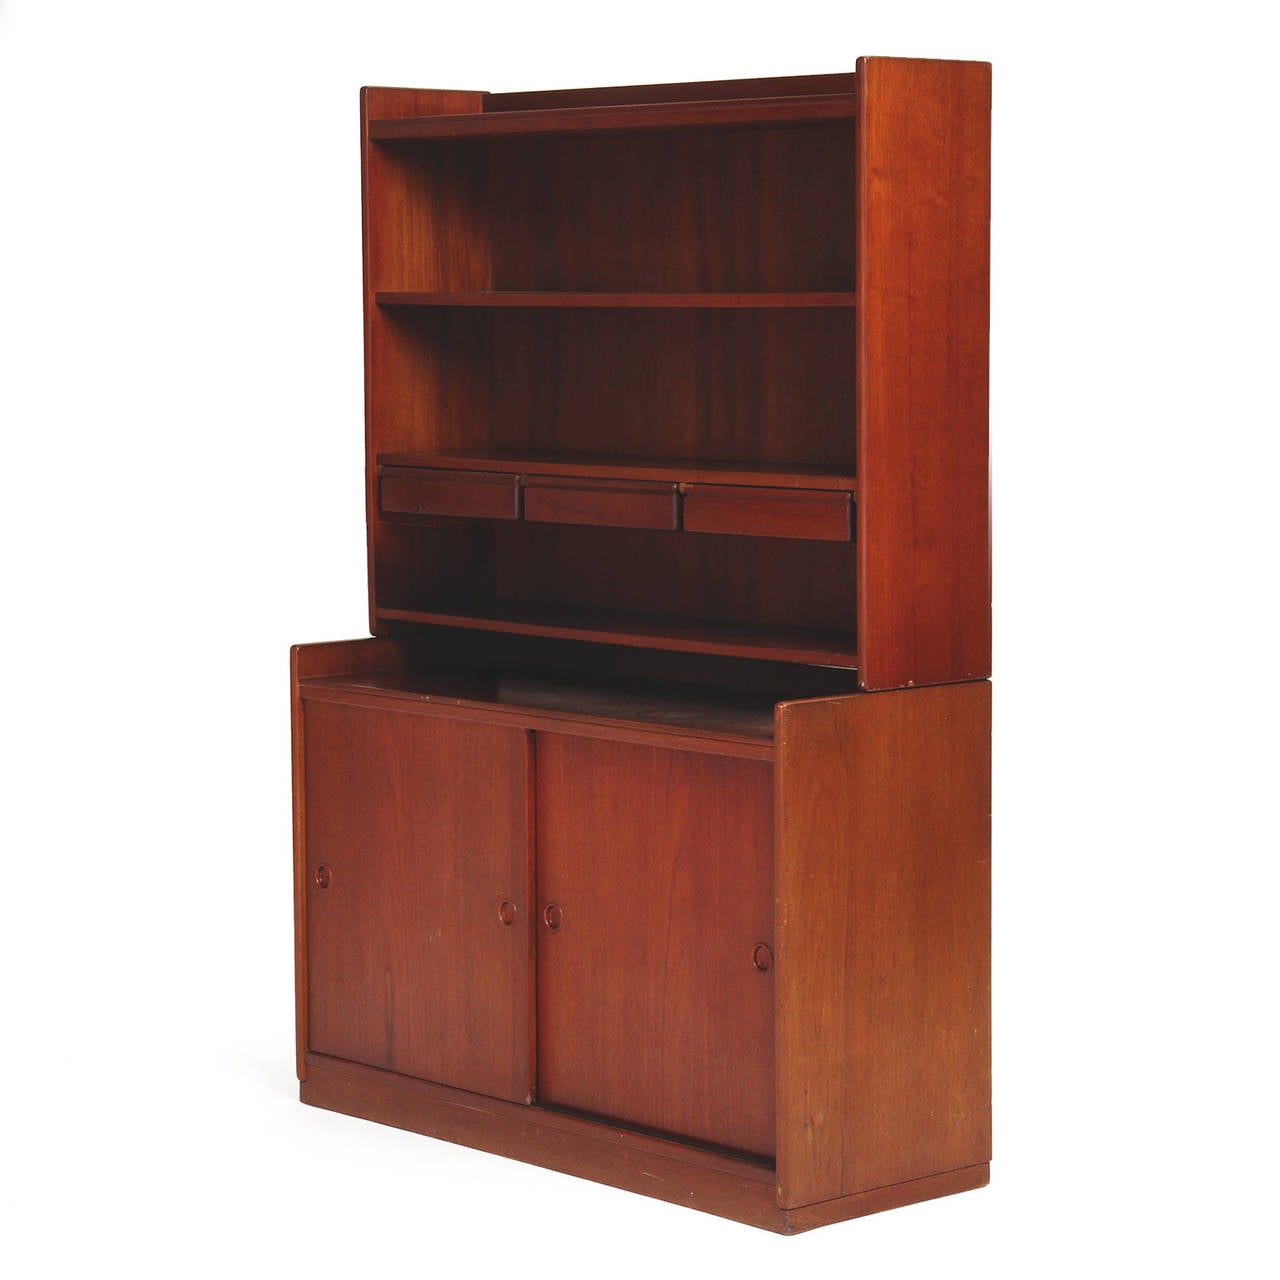 An elegant, finely crafted and spare modular floor cabinet in solid rich teak having an upper section with adjustable open shelves and three floating drawers perched on a base with two sliding doors accessed by recessed finger pulls.